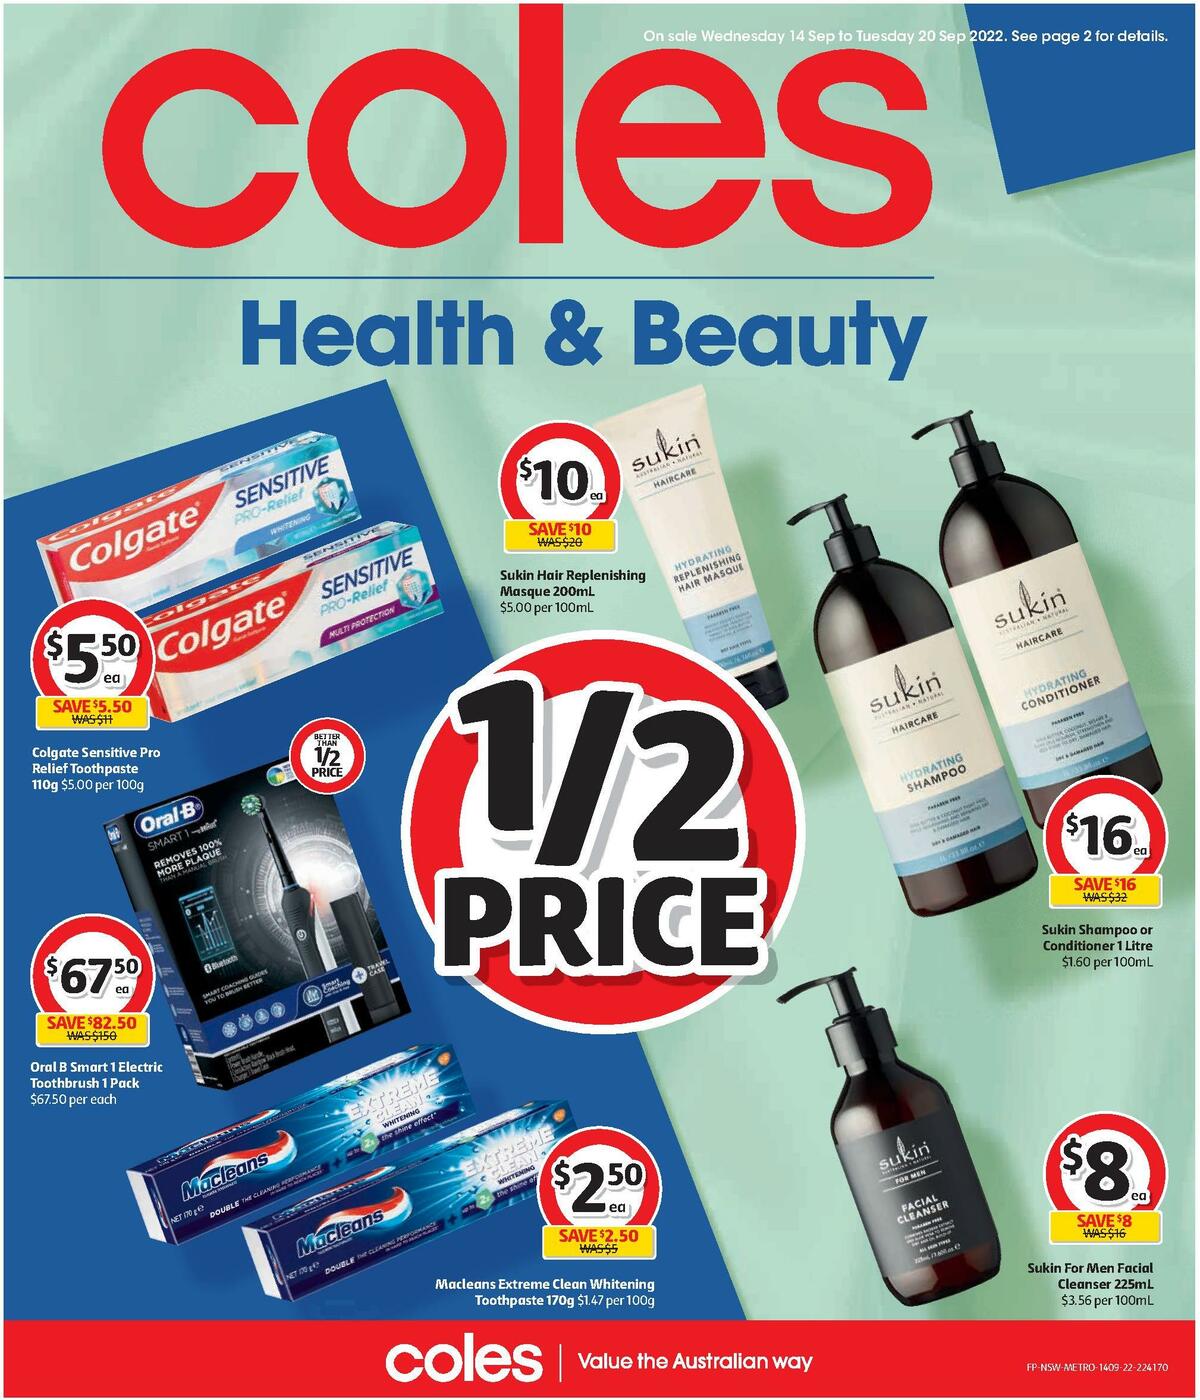 Coles Health & Beauty Catalogues from 14 September